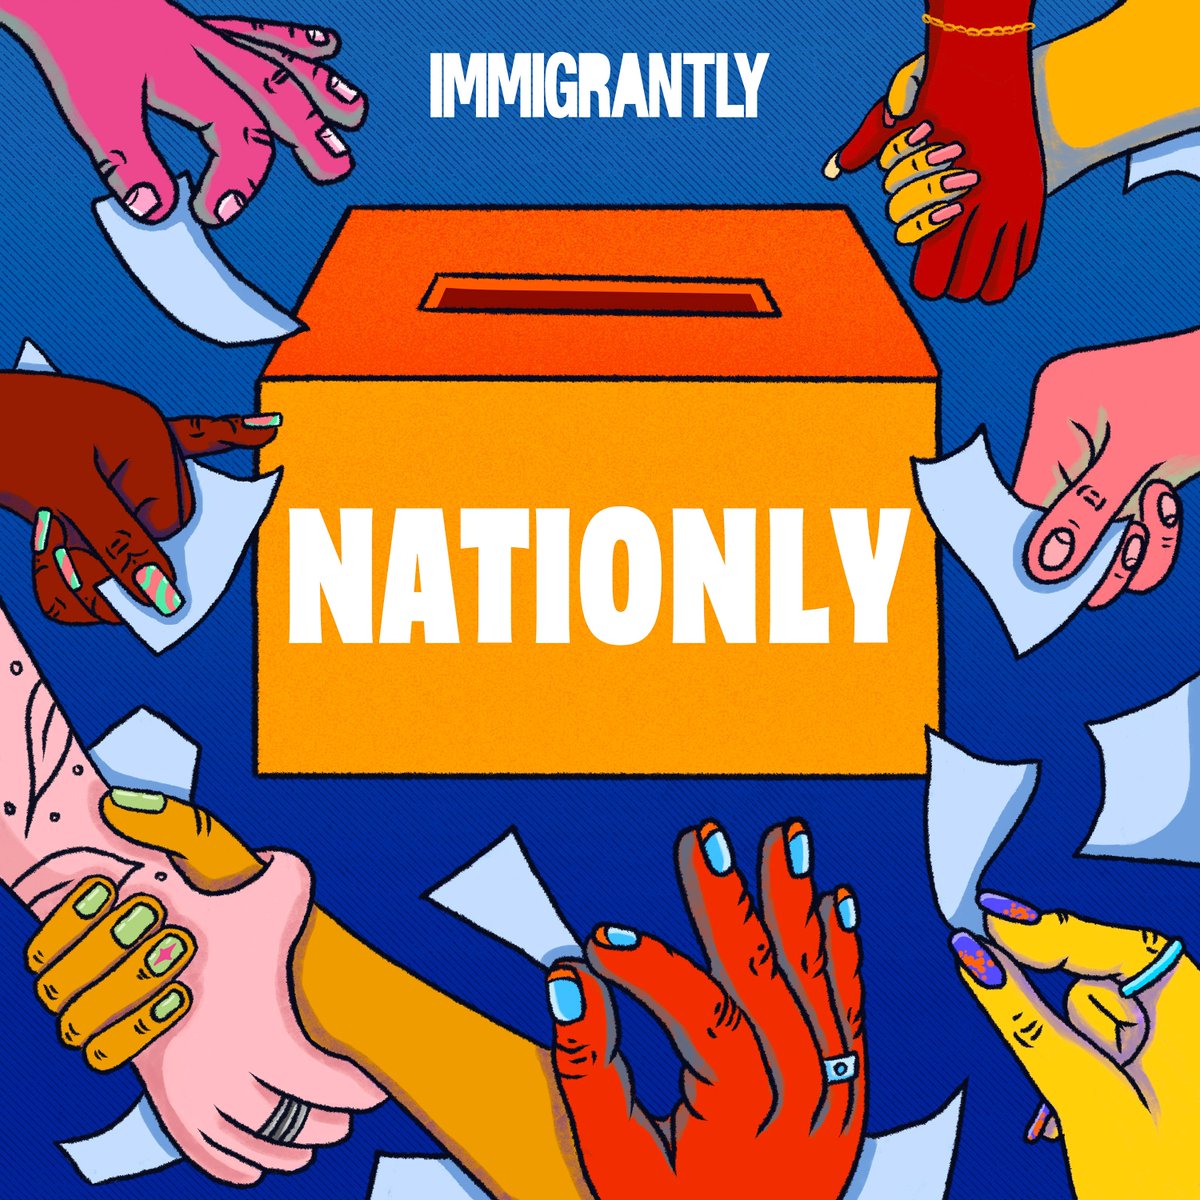 In June, we're launching Immigrantly Media's newest podcast, Nationly, hosted by @sarasadhwani and @juandr47. The podcast focuses on the 2024 U.S. presidential election—the trailer for Nationly premieres on May 23. Art by: @sarah_dimichele